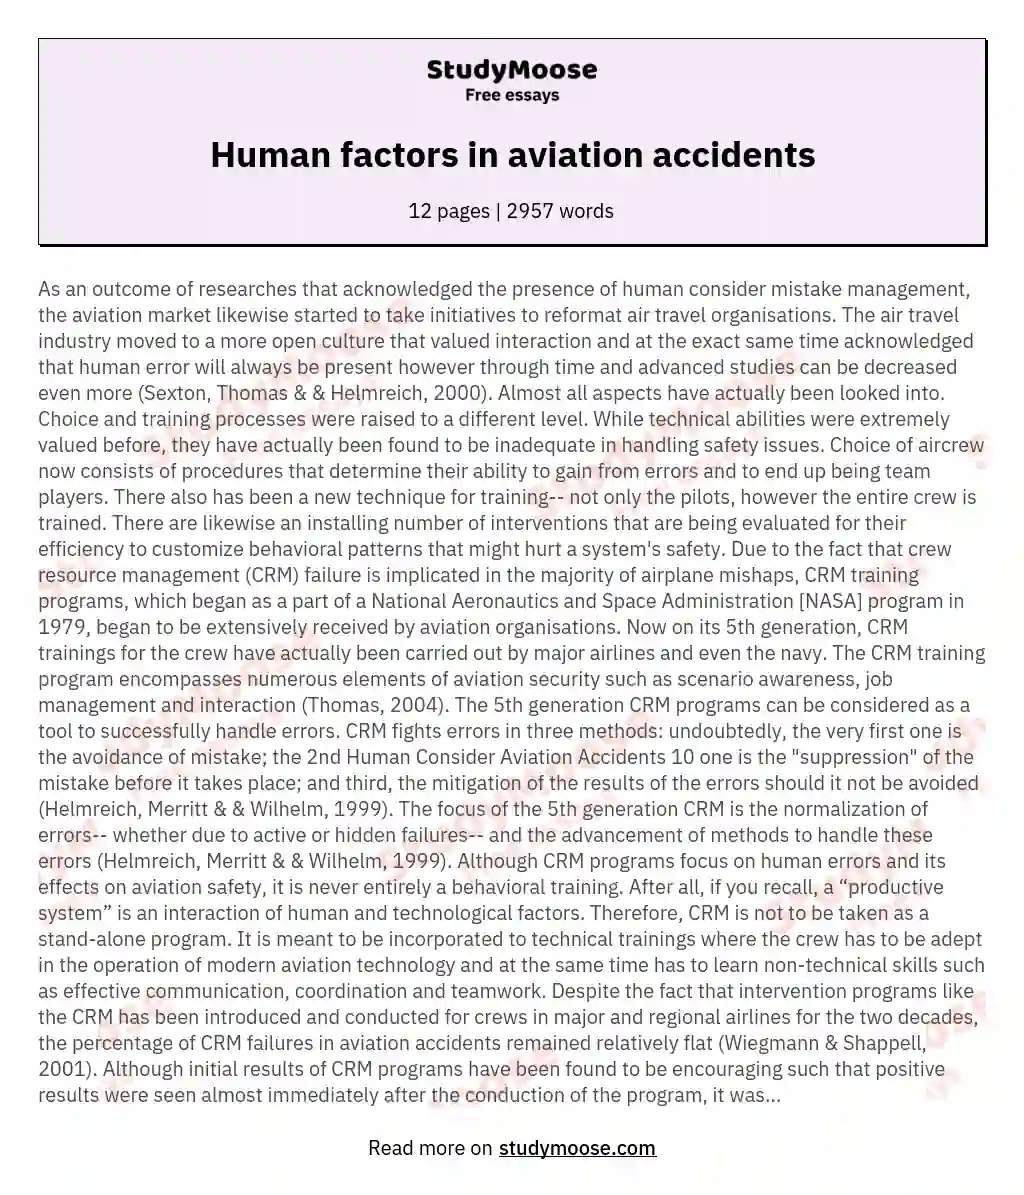 Human factors in aviation accidents